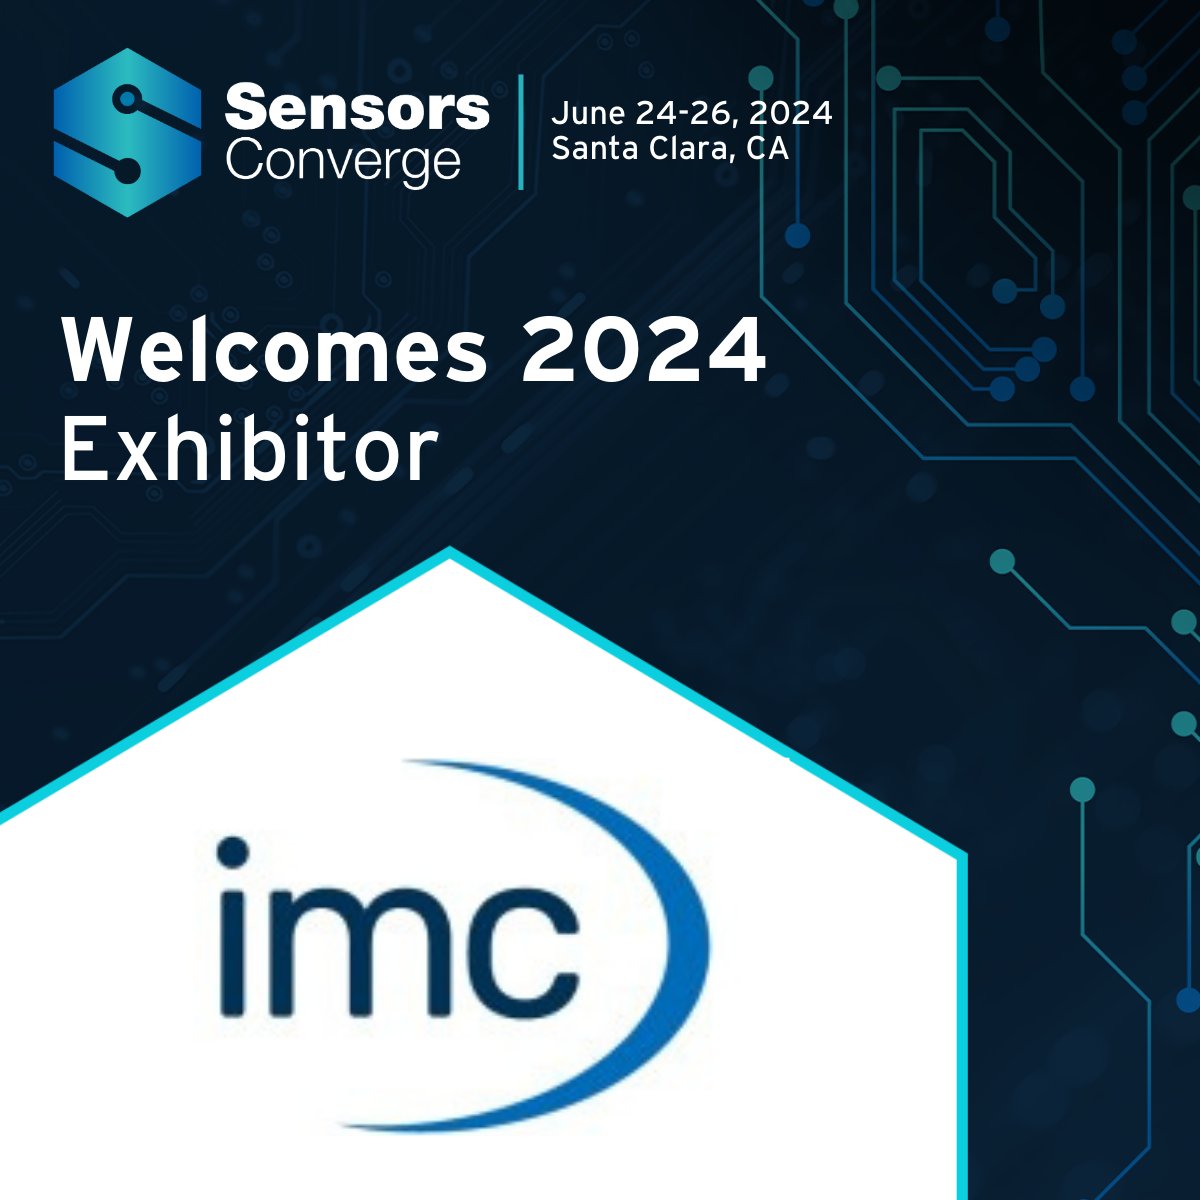 Welcome imc Test & Measurement to #SensorsConverge! imc provides all the software solutions that you need for your measurement tasks. Learn more: imc-tm.com Register and join us this June 24-26 in Santa Clara! sensorsconverge.com/sensorsconverg… #sensors #complexautomation